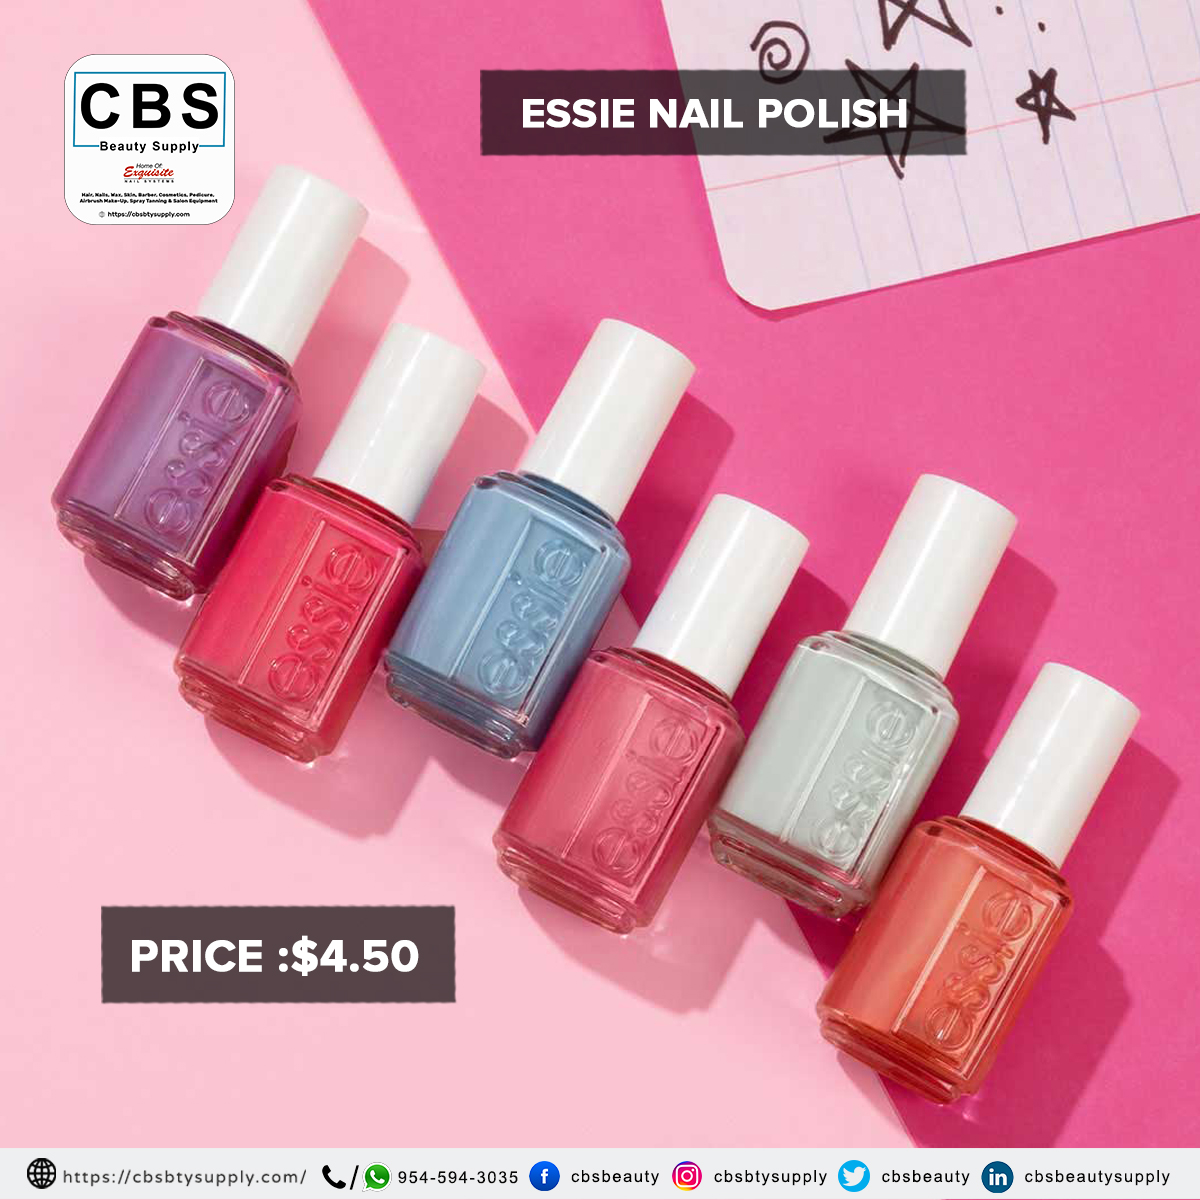 cbsbtysupply.com/product-catego…

Category Name : Essie Nail Polish

Get premium quality products at CBS Beauty Supply with good discounts

#cbsbeautysupply #beautyindustry  #tanningsupplies #essienailpolish #barberchairs #andisclippertrimmer #babylisspro #essienailpolish